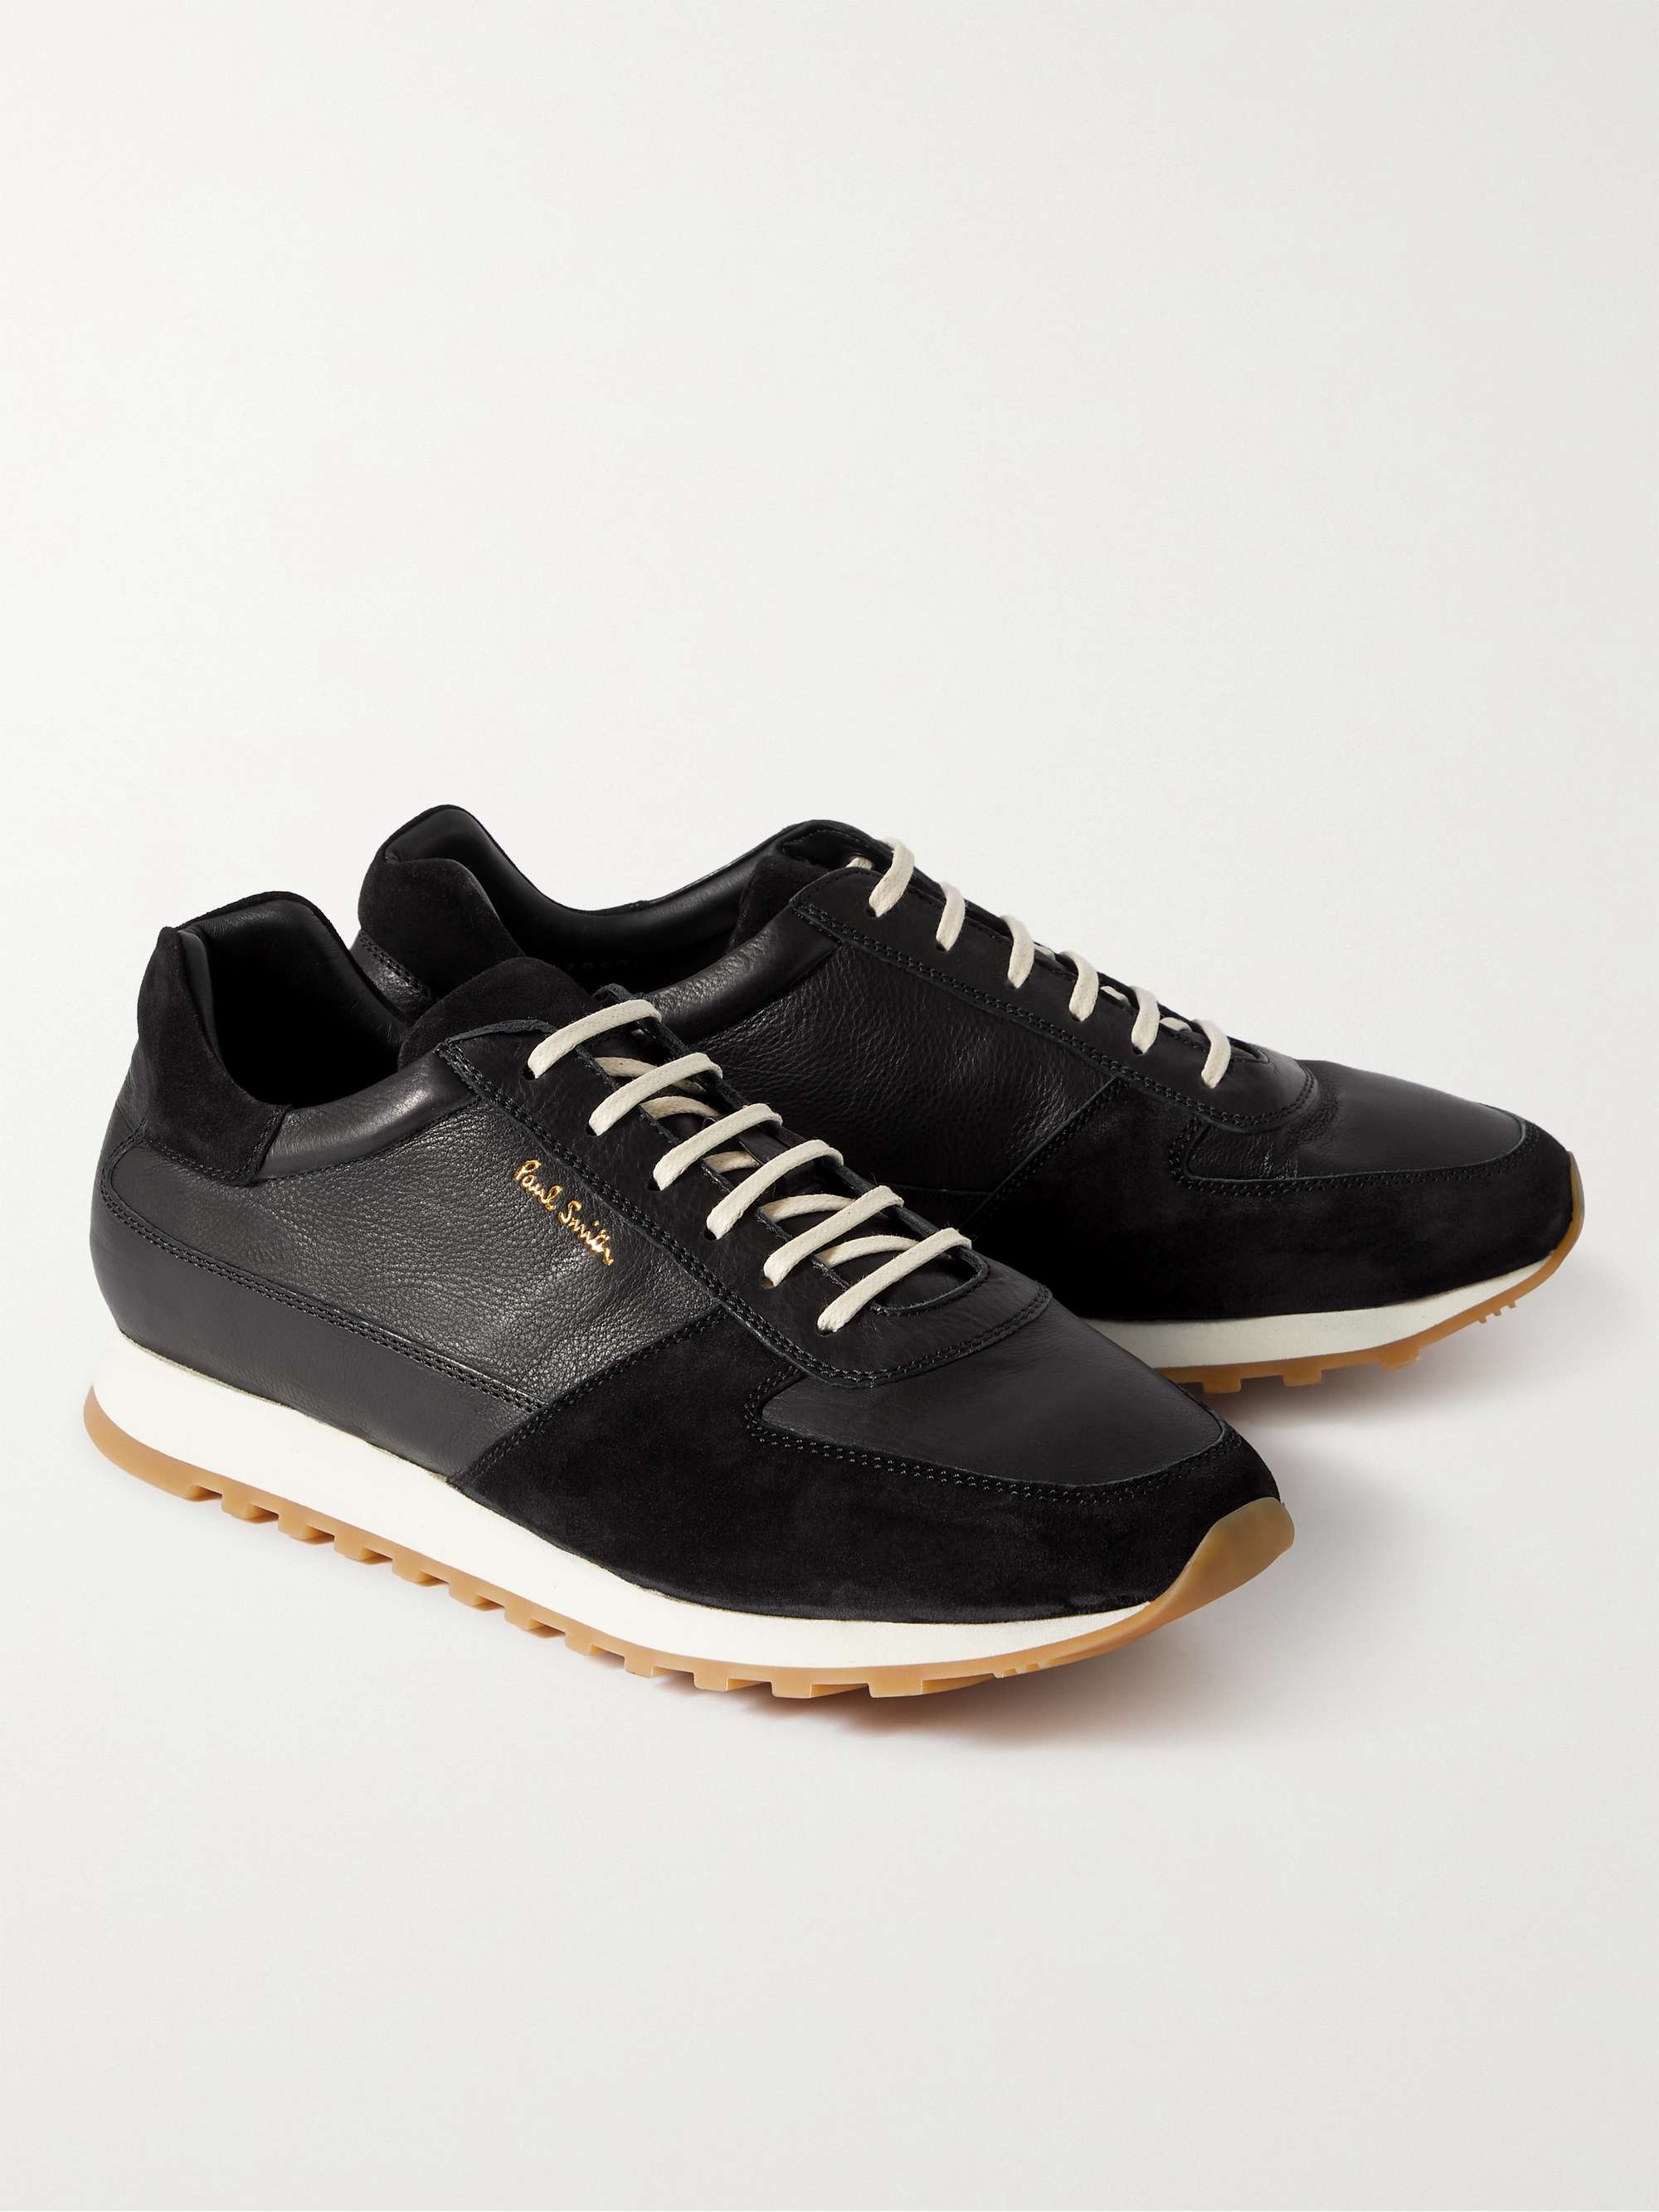 PAUL SMITH Velo Full-Grain Leather and Suede Sneakers